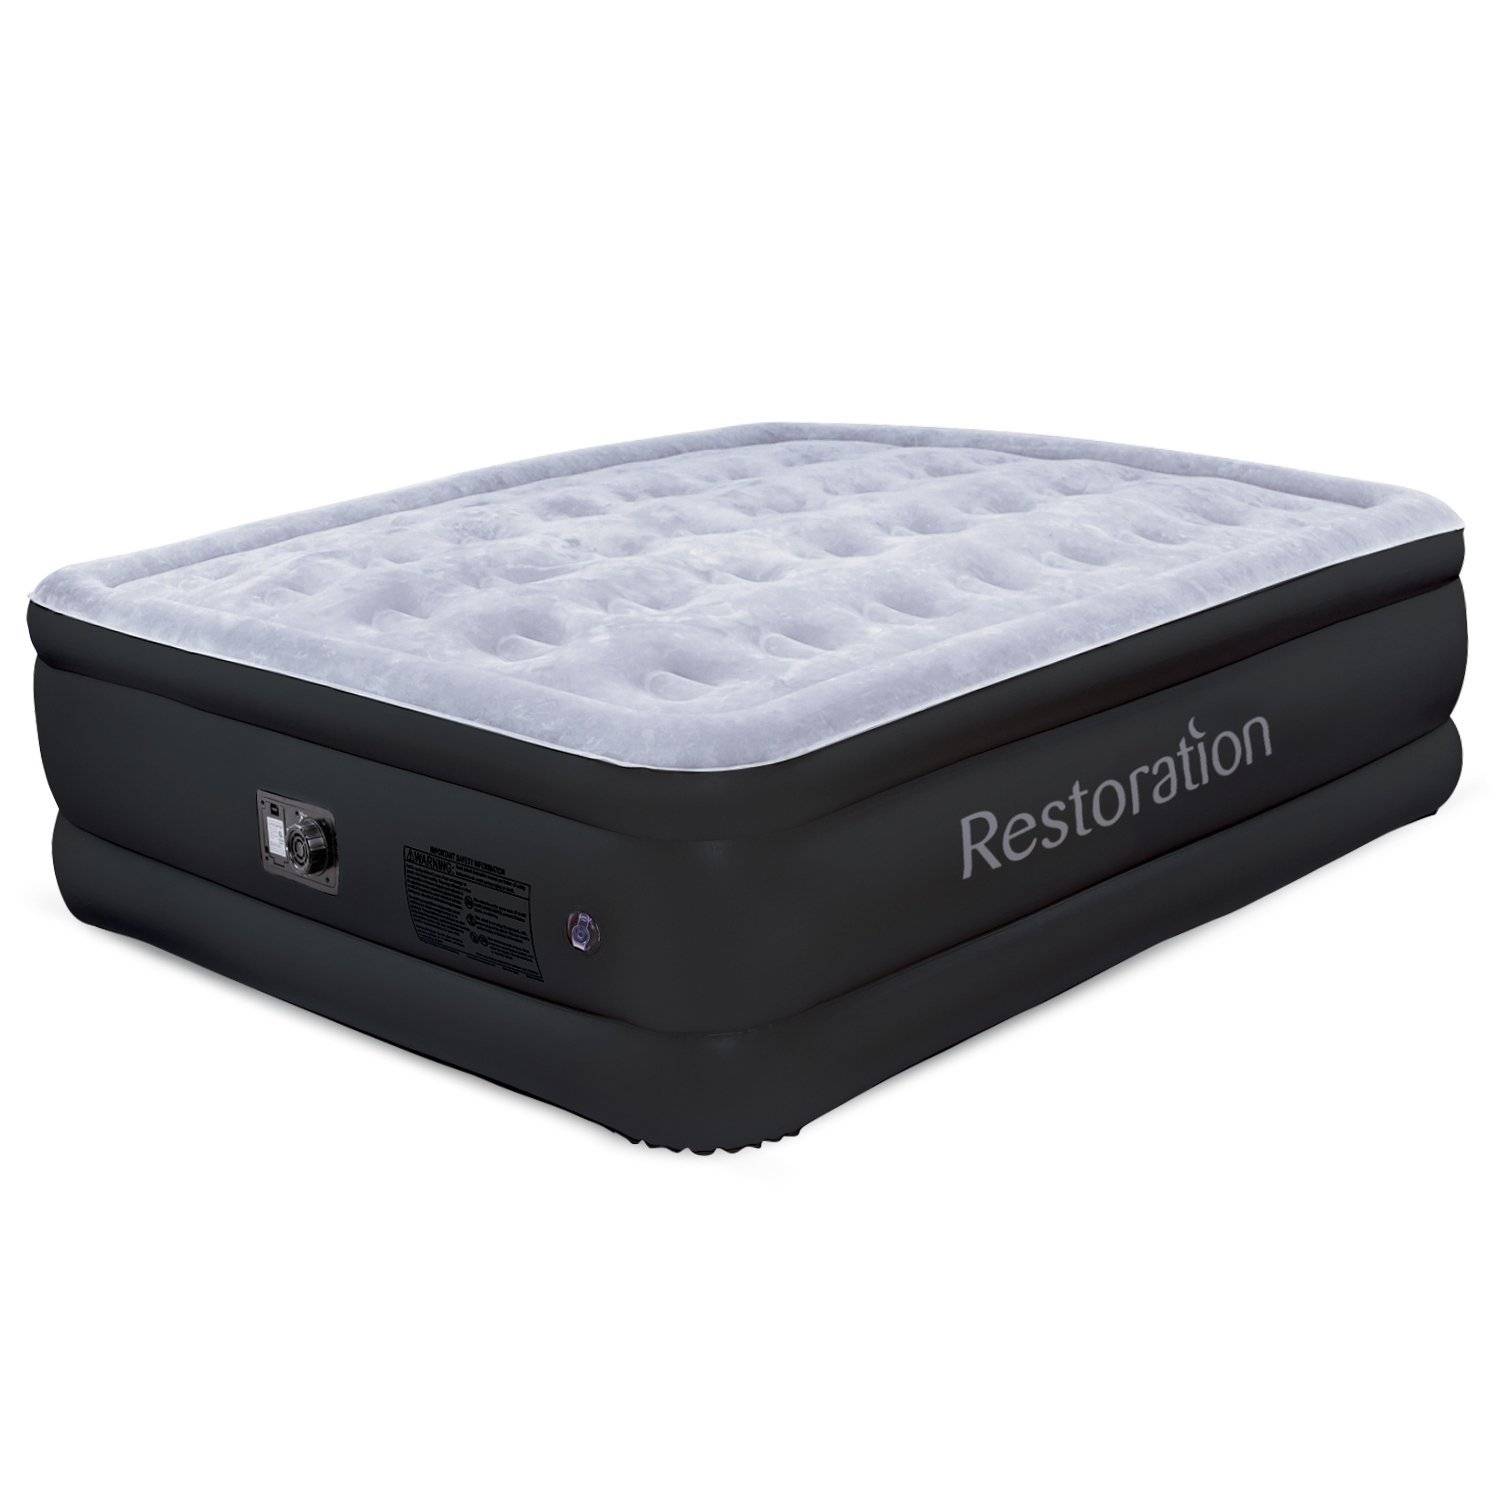 Sleep Restoration Queen Size Inflatable Airbed with Built-In Electric Pump